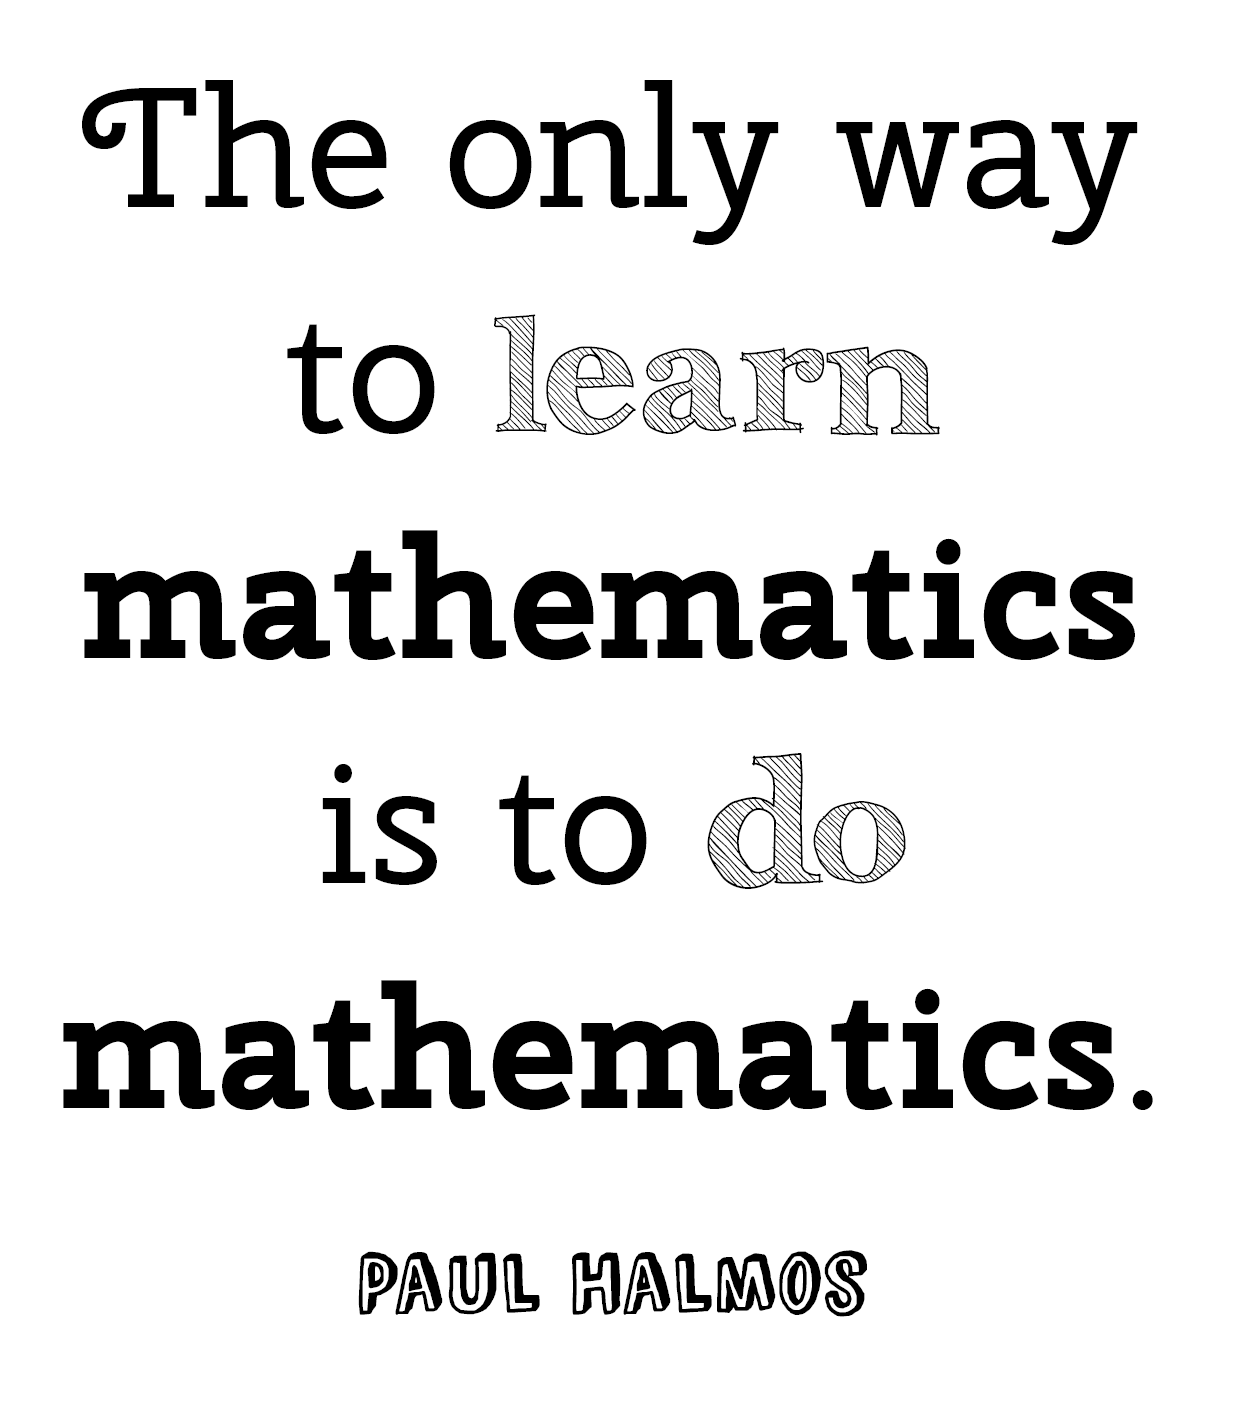 The only way to learn mathematics is to do mathematics Paul Halmos